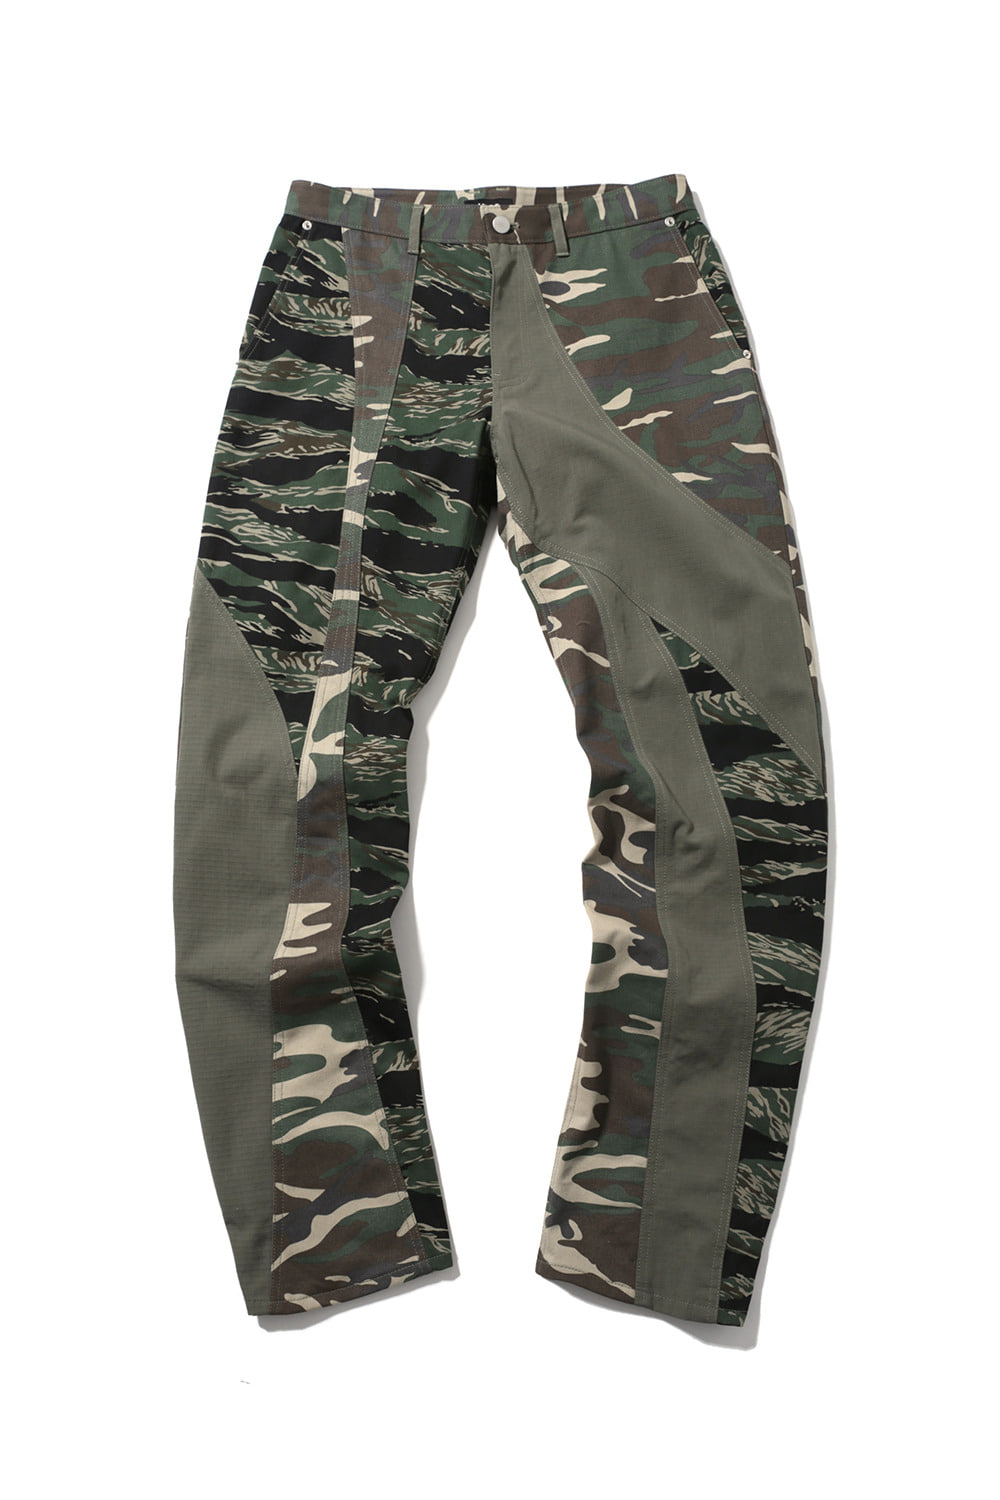 Mixed camouflage pants